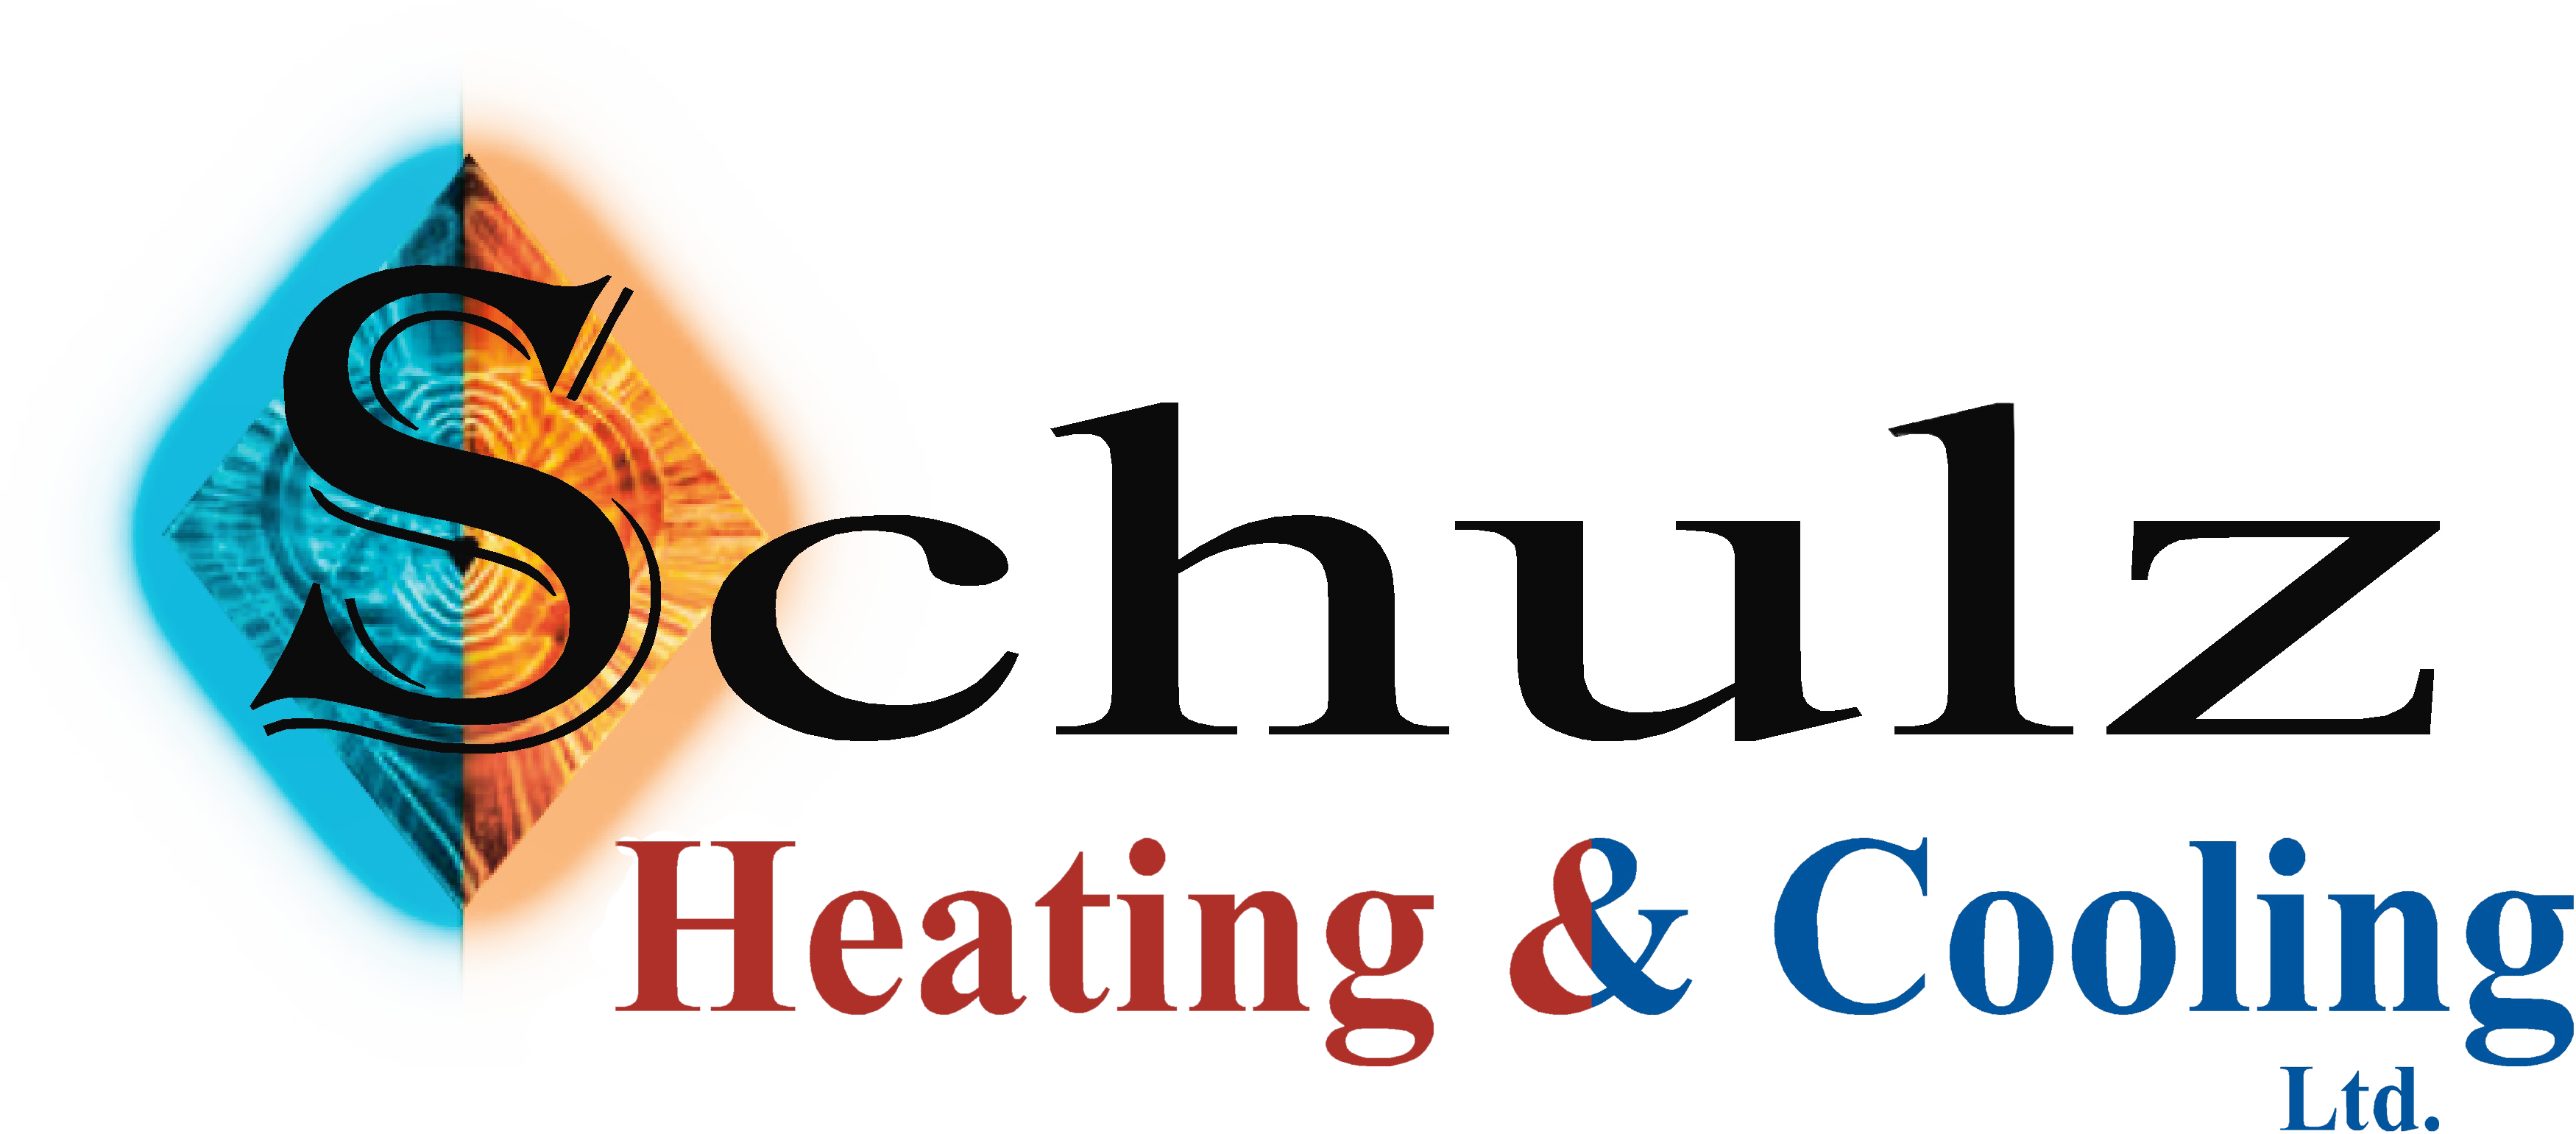 Schulz Heating & Cooling - Bang Head Here (3500x1541), Png Download